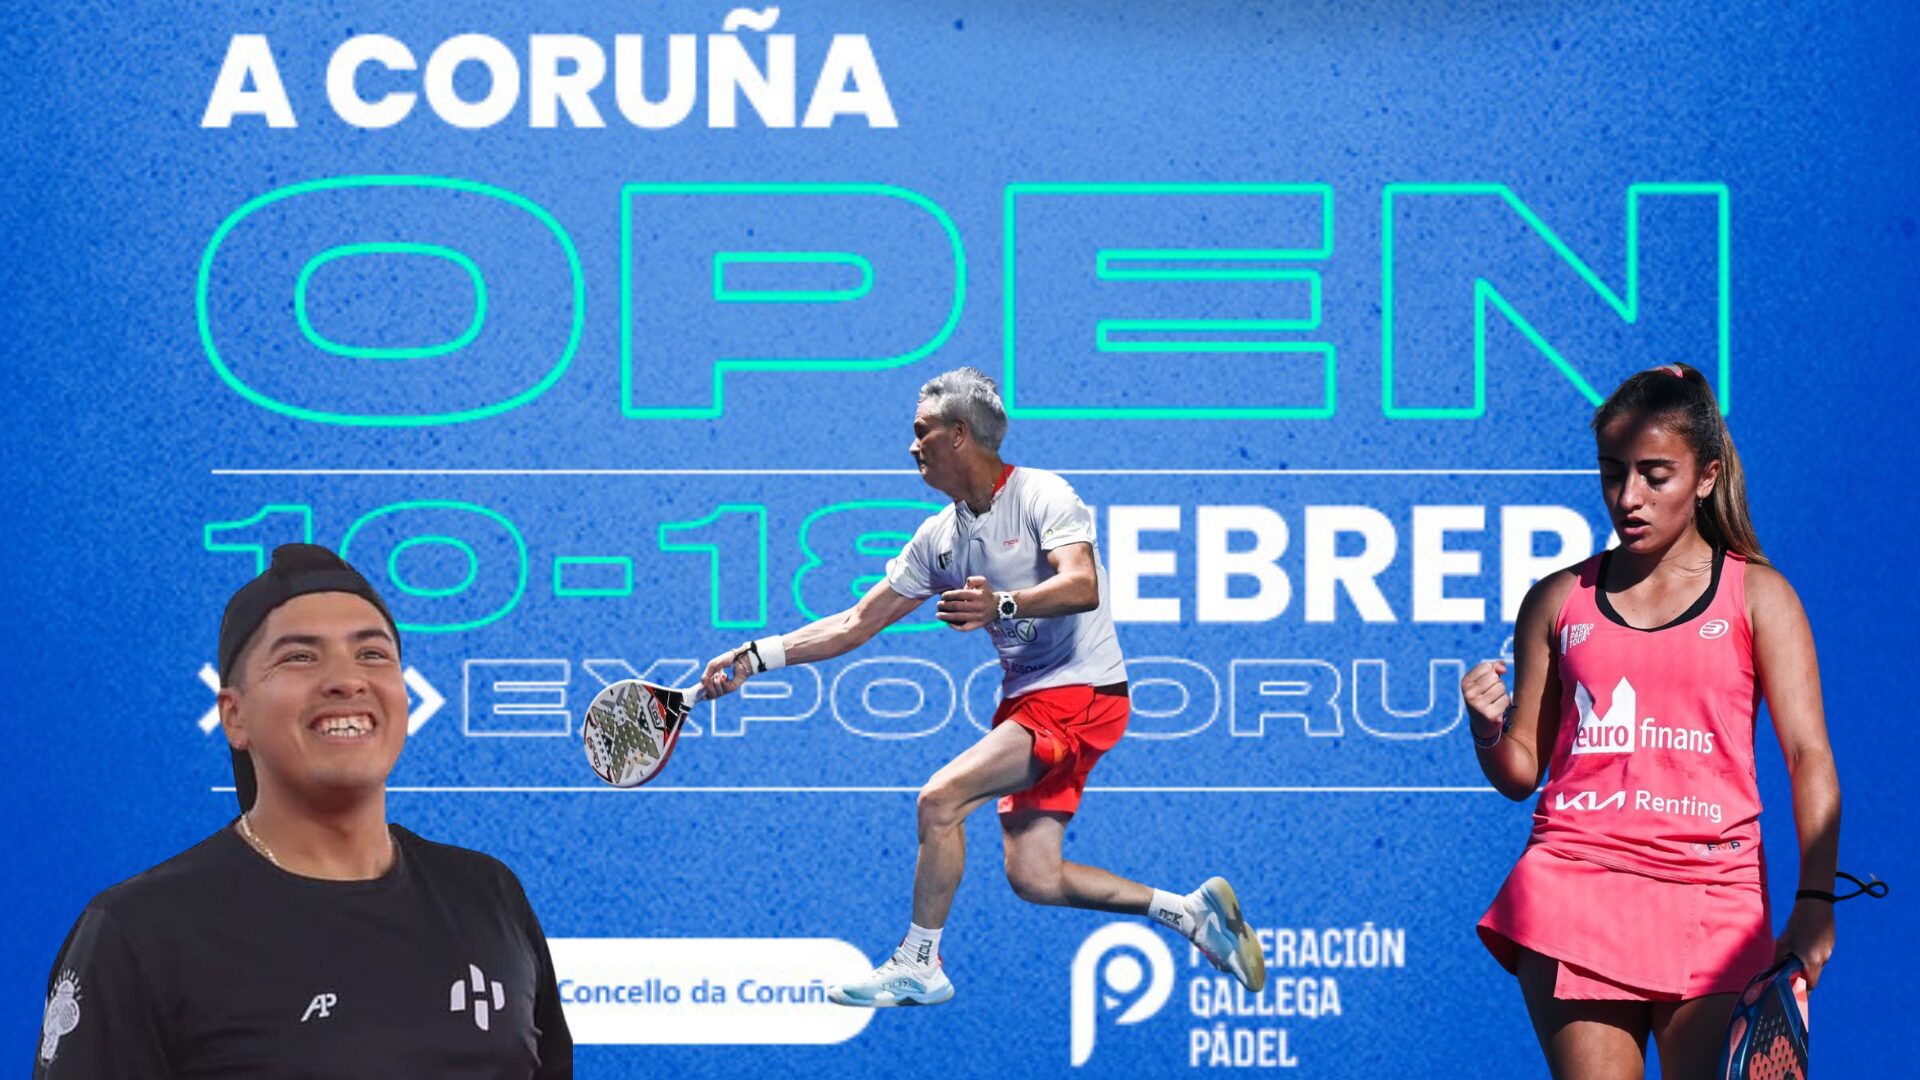 Ultimate Padel Tour – An event in Galicia from February 10 to 18, with lots of people registered!